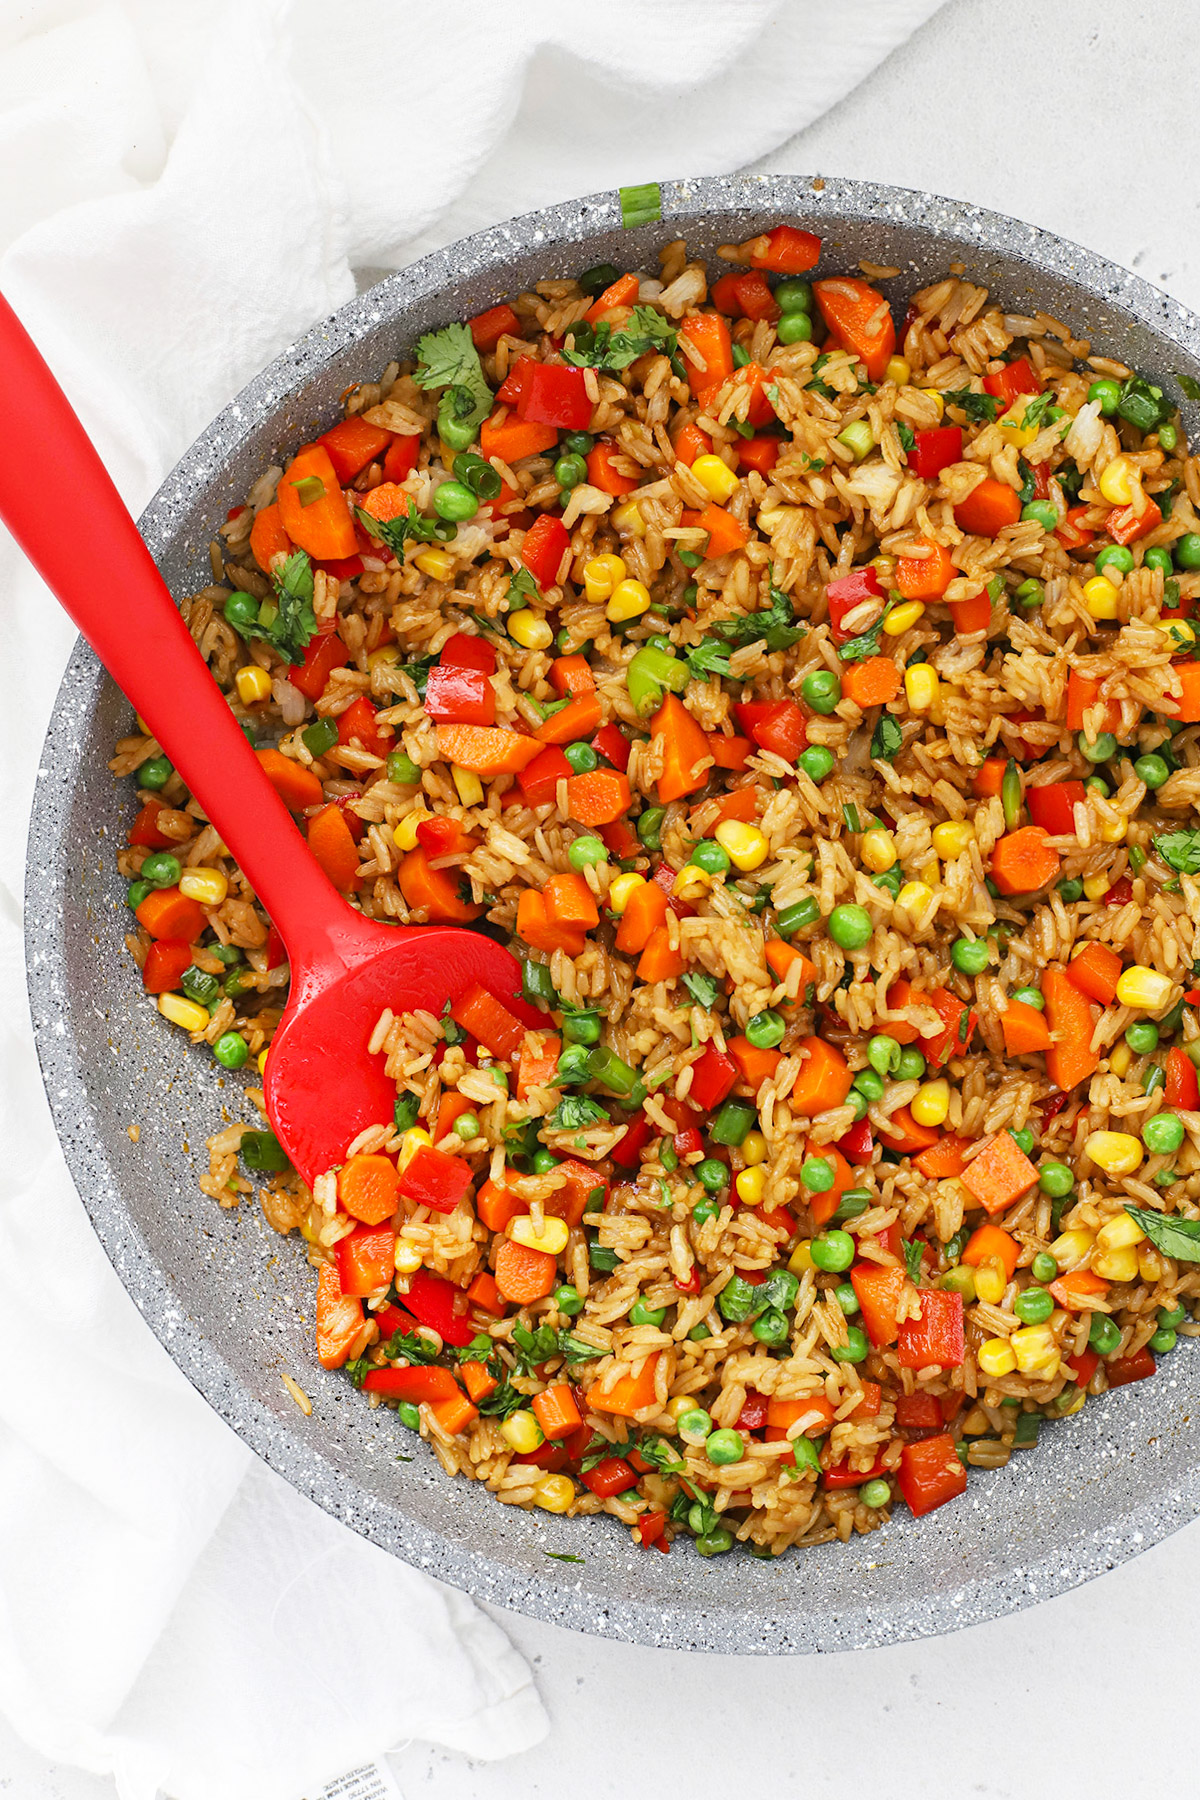 Overhead view of a pan of healthy vegetarian fried rice with colorful veggies